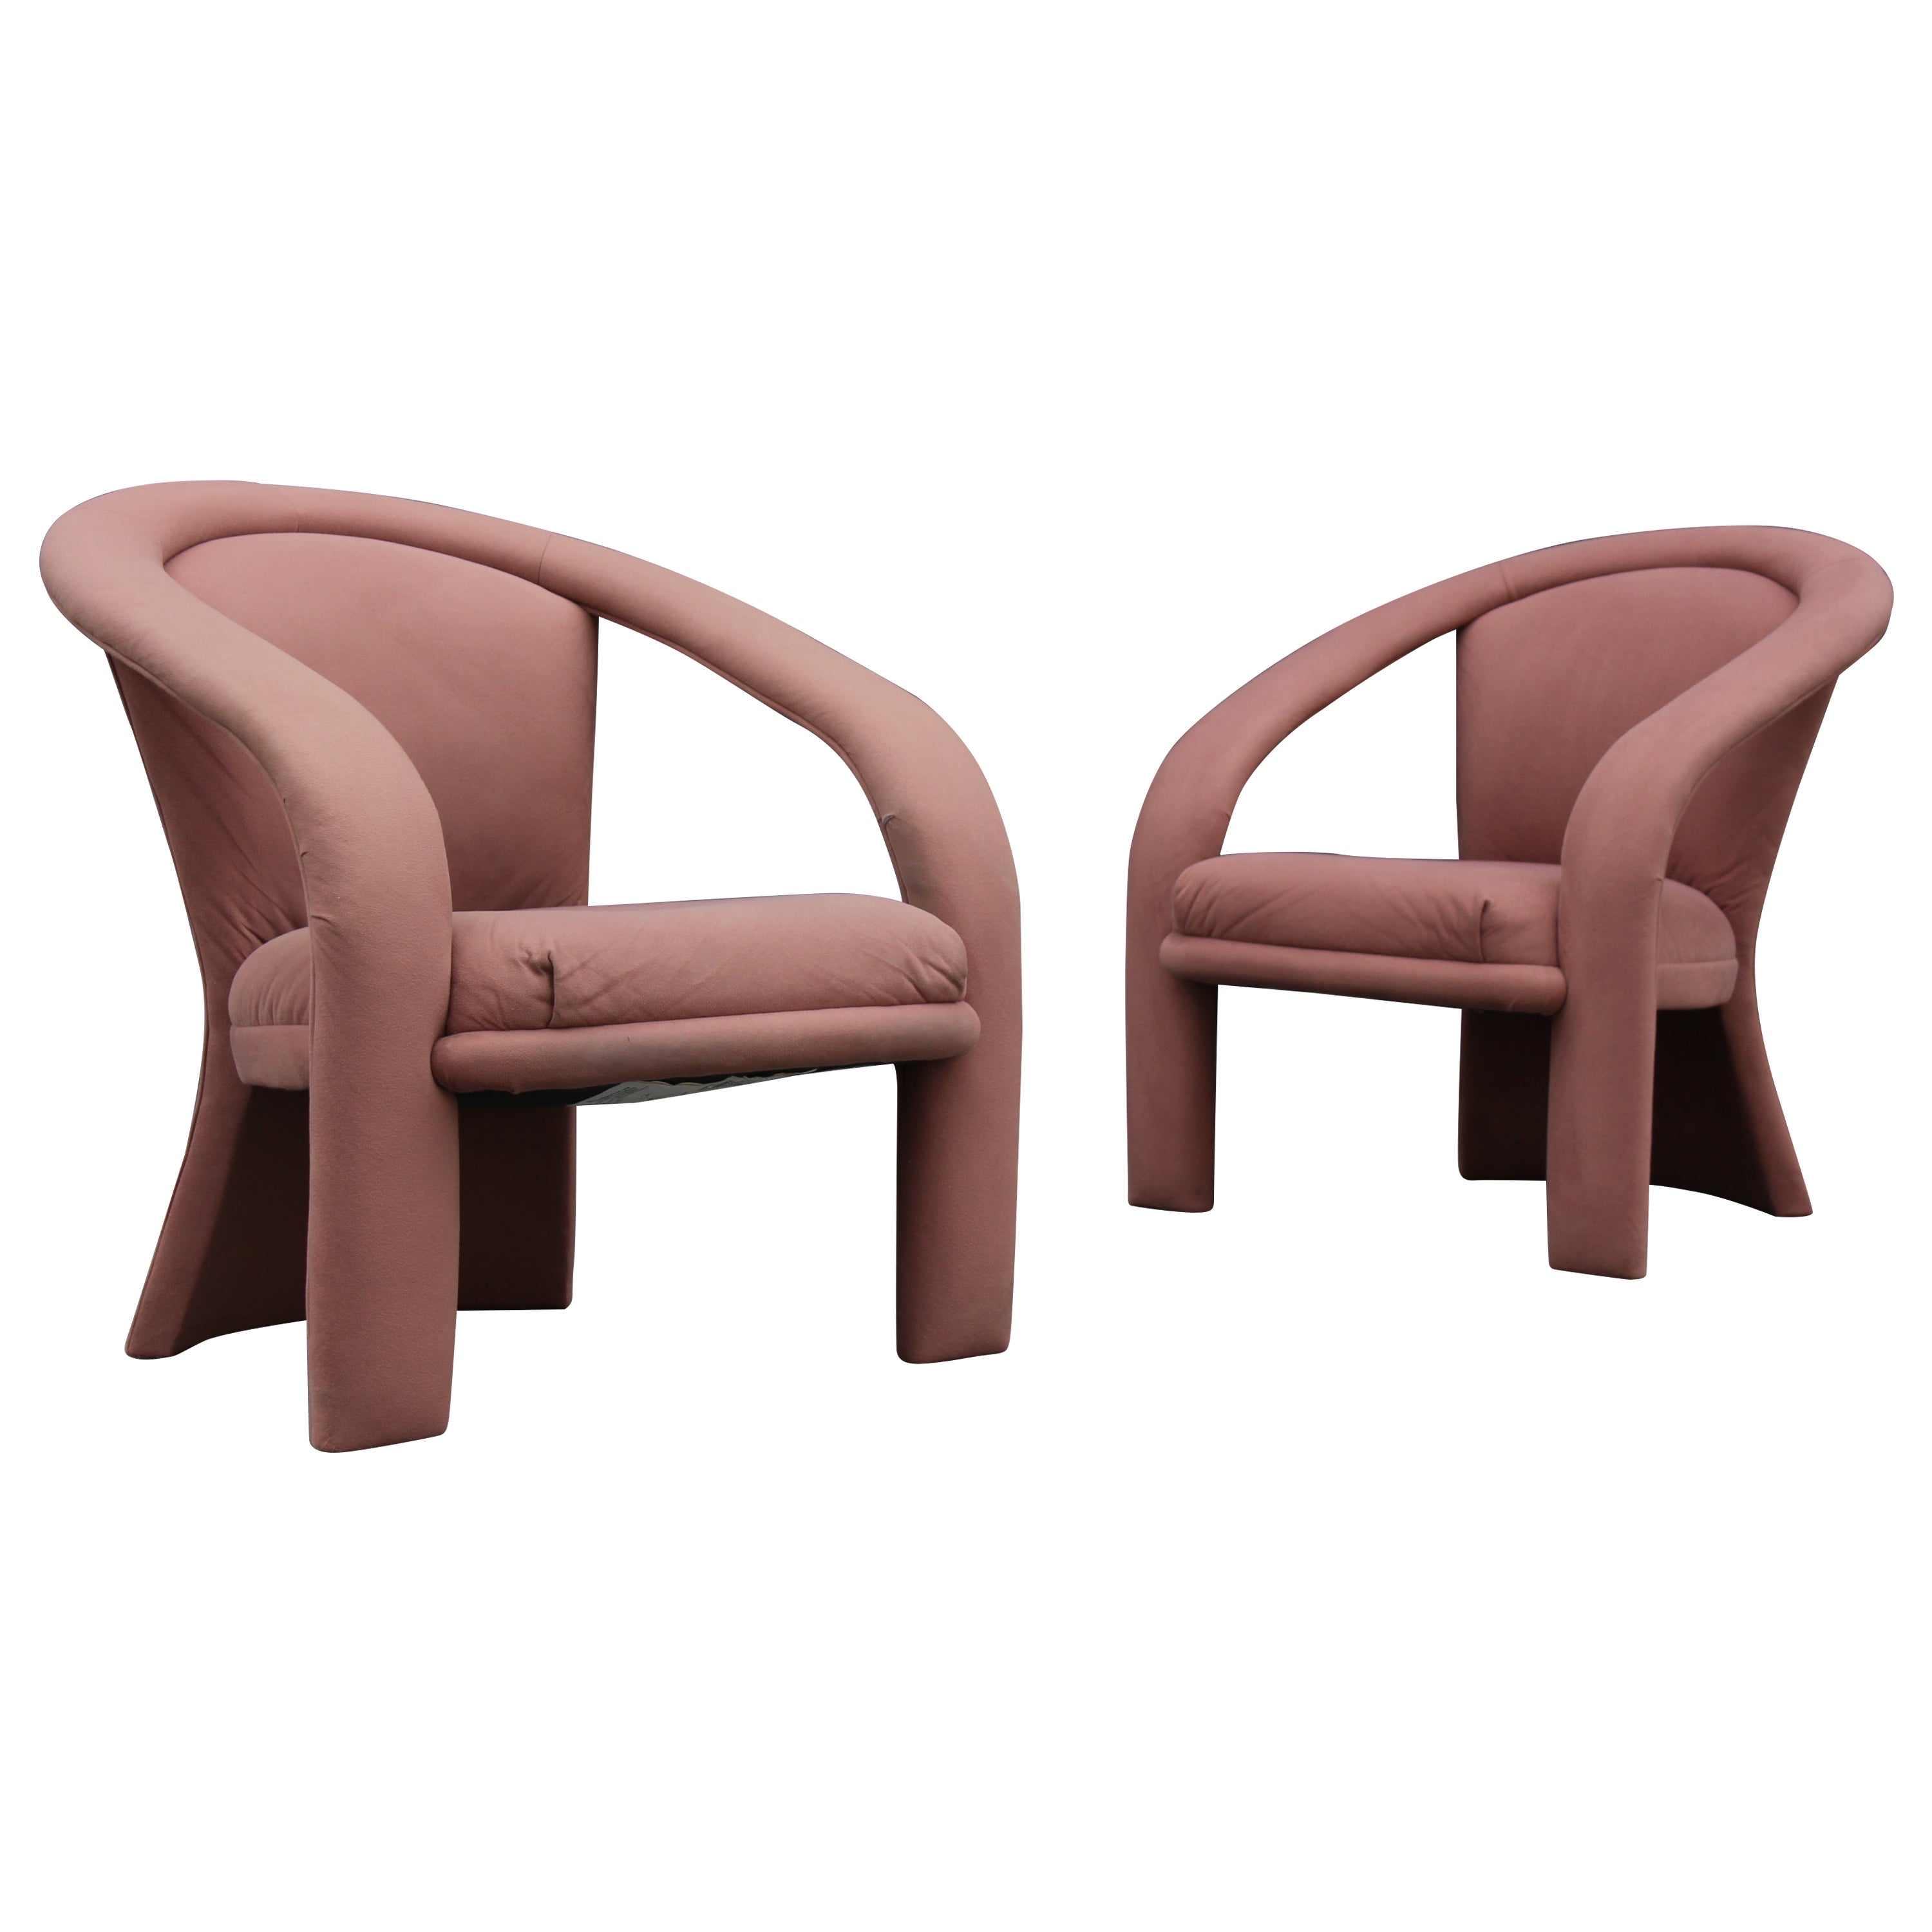 Pair of Pink Suede Sculptural Ribbon Armchairs or Lounge Chairs by Marge Carson For Sale